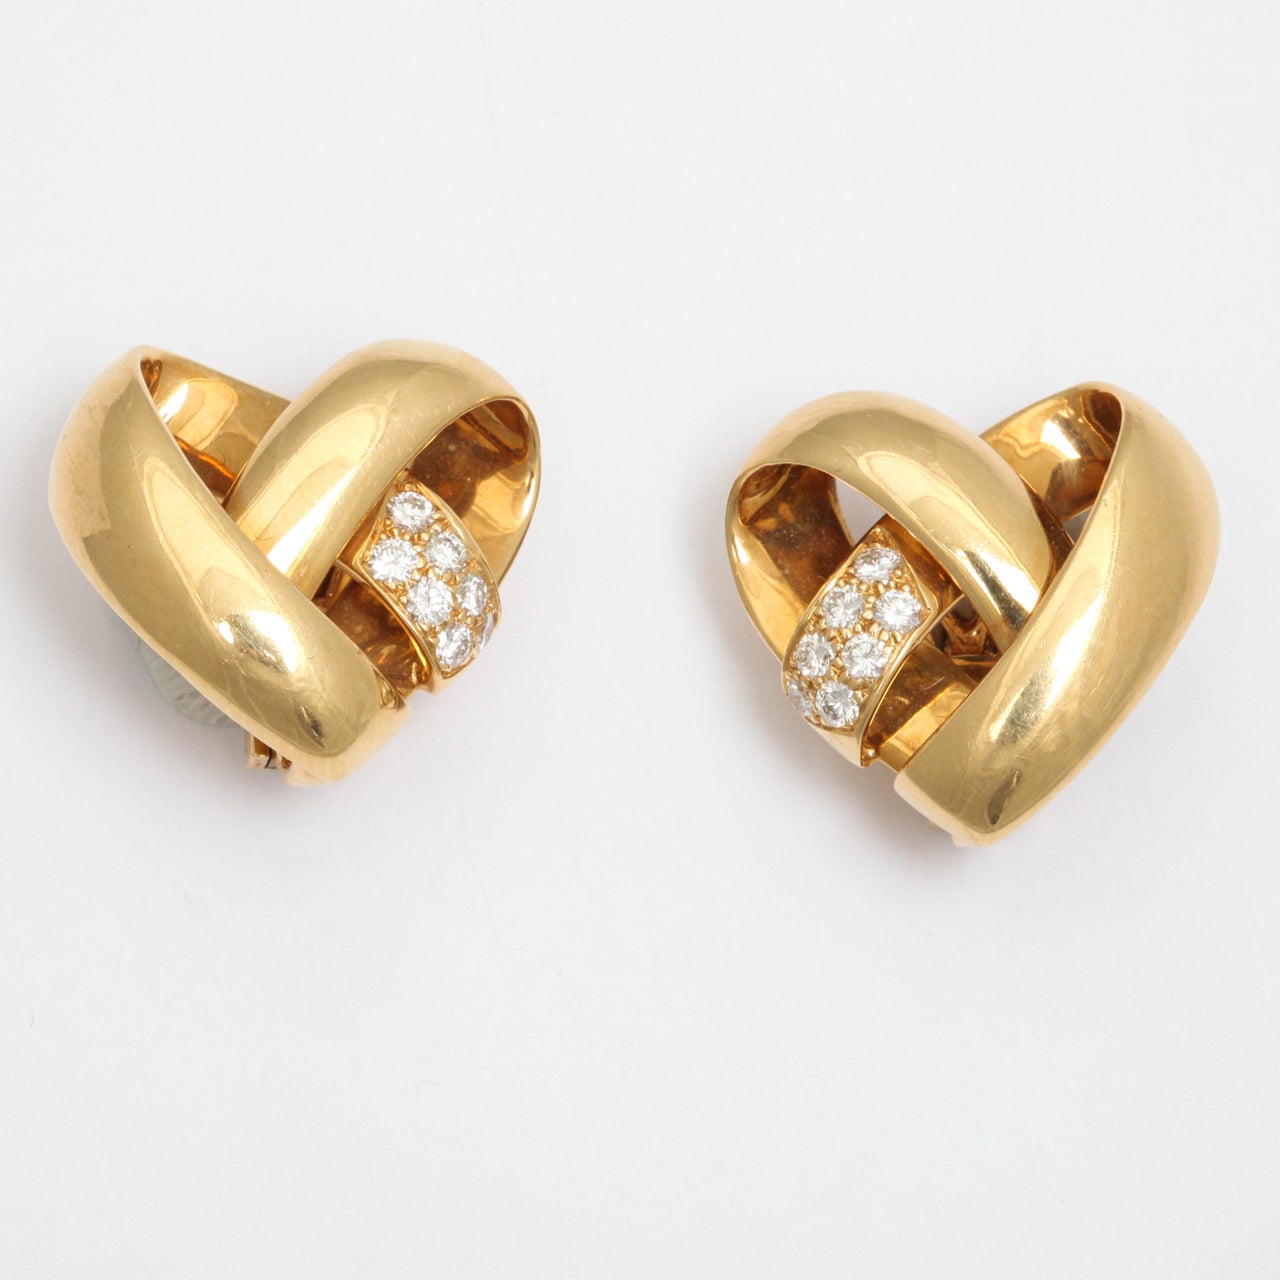 VCA Heart Shaped Earrings made up of inter woven bands set with very fine round Diamonds (E-F,VS).